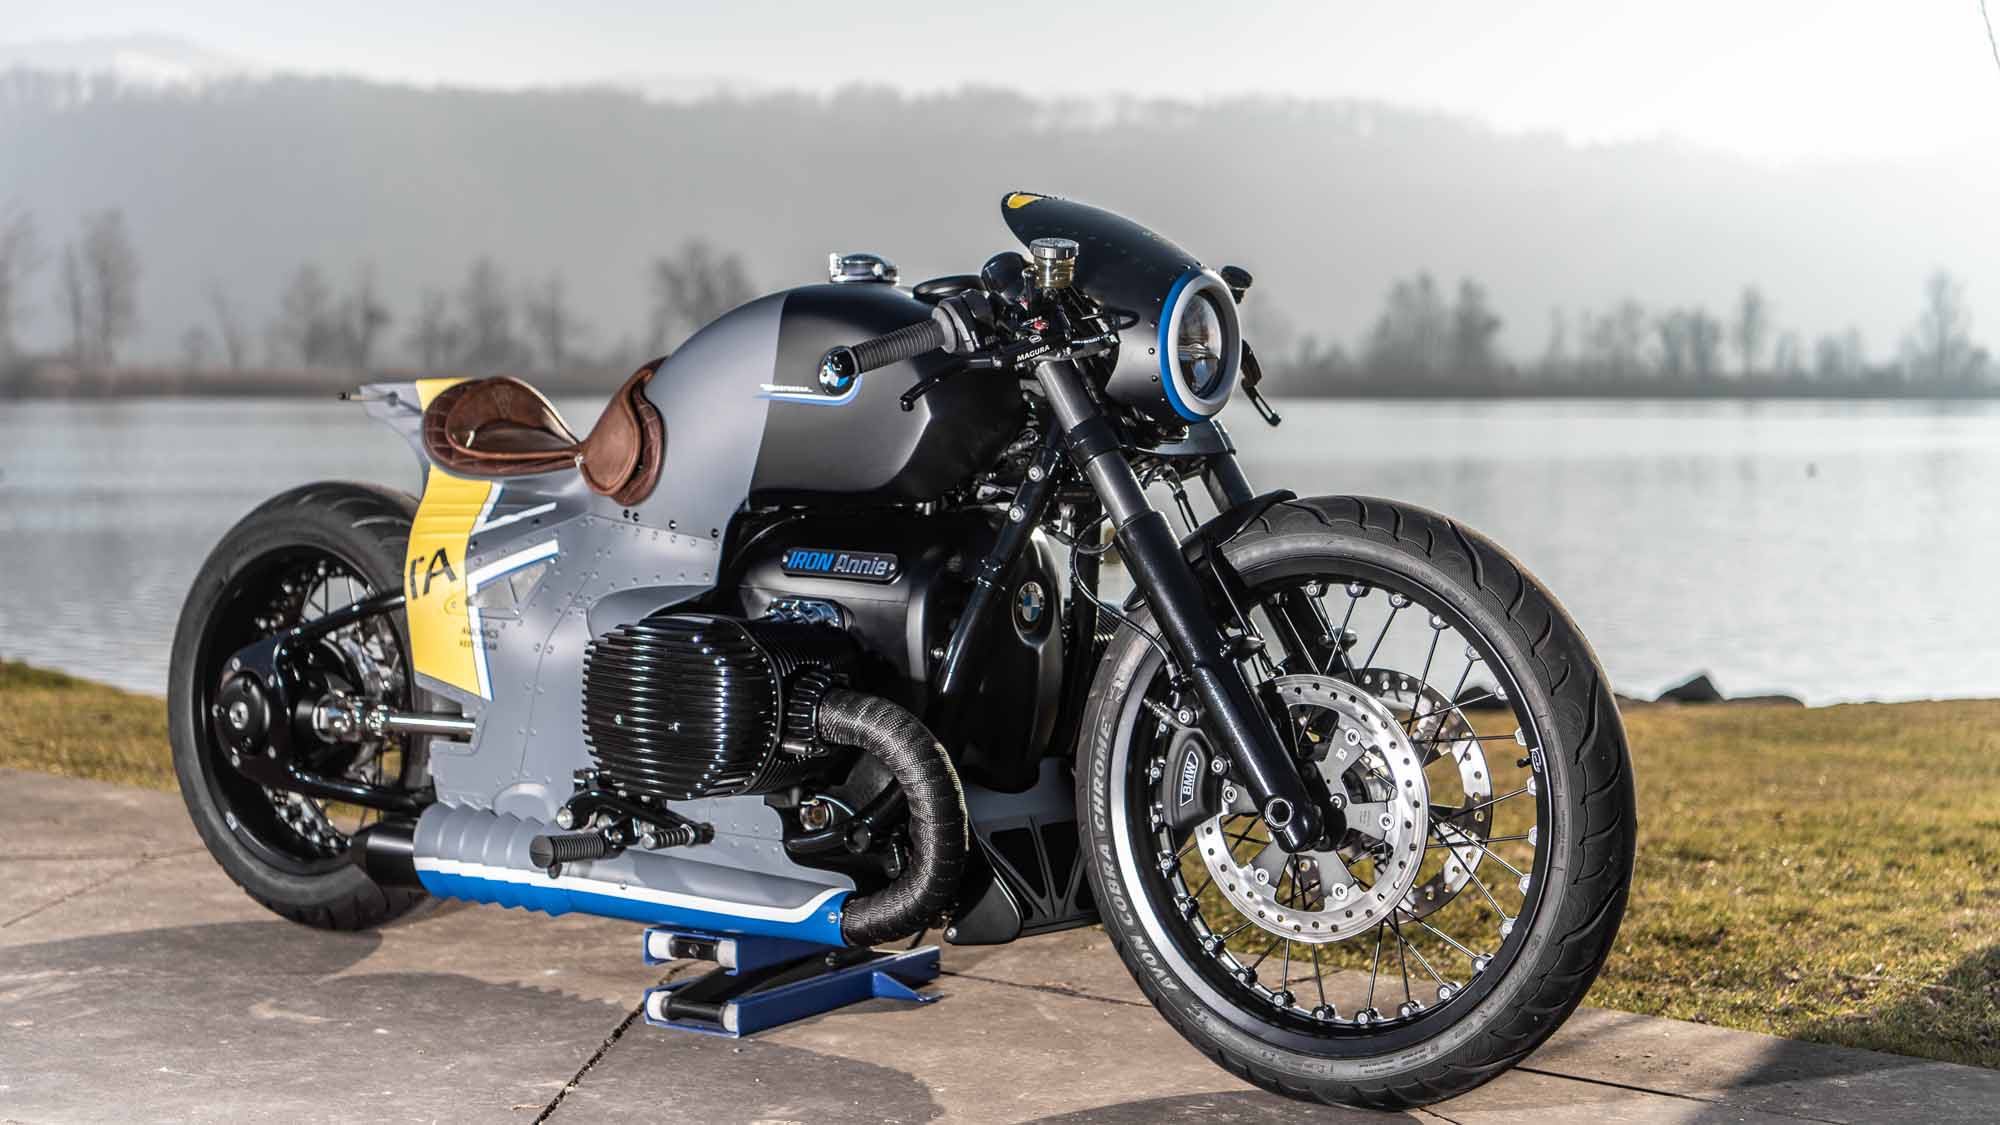 BMW R 18 “IRON ANNIE” by VTR Customs: A unique customizing project